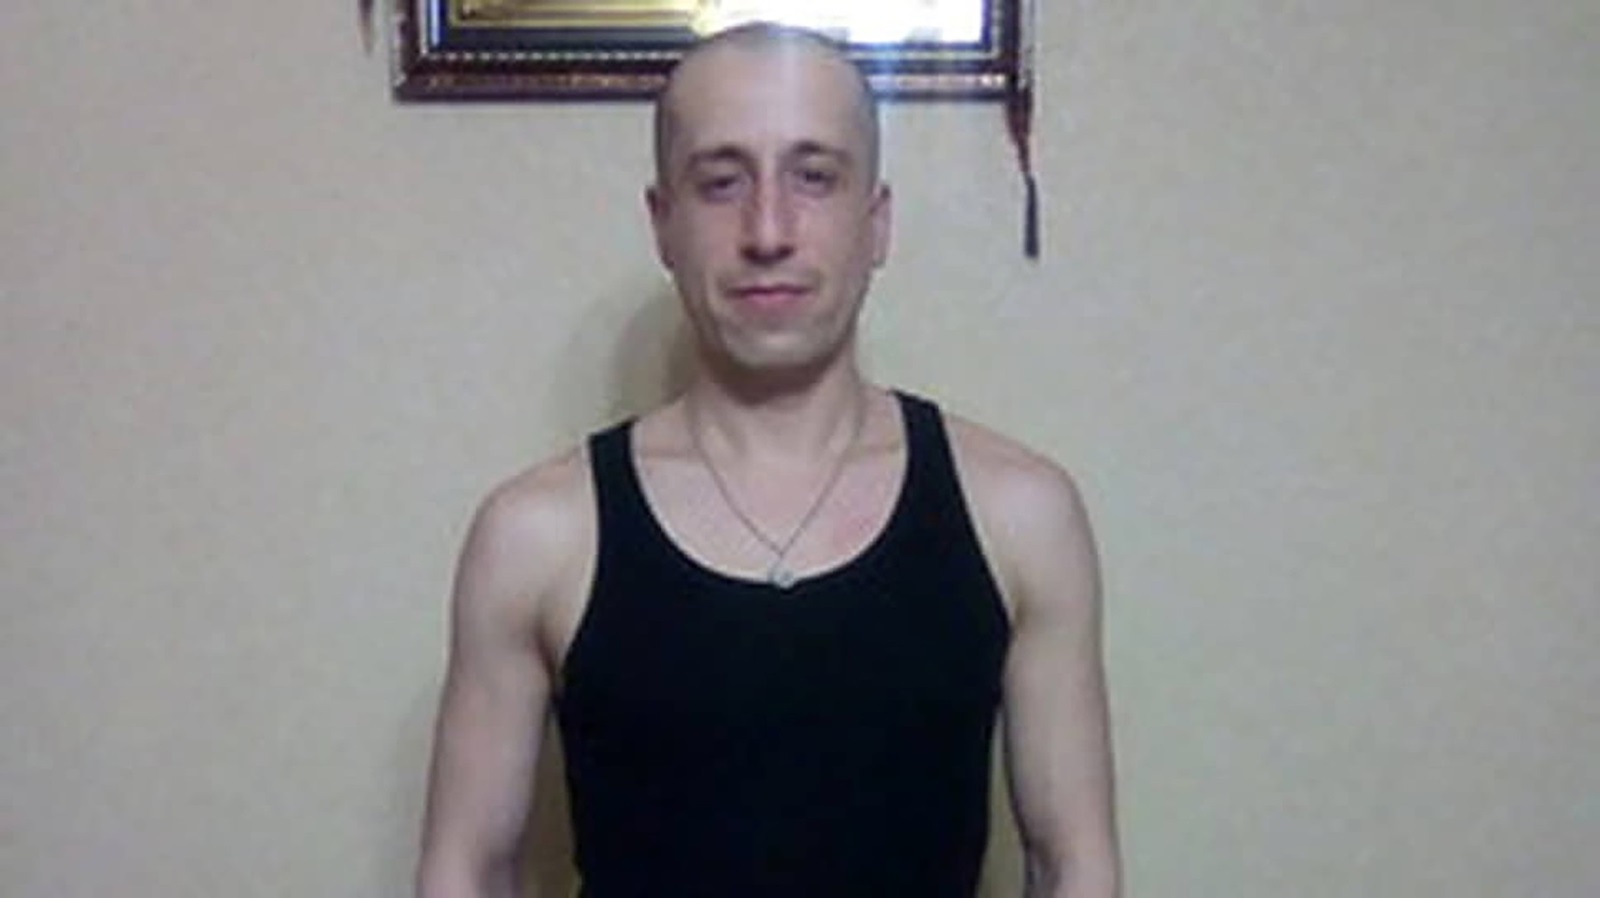 Radik Tagirov, 39, dubbed Volga maniac, is charged with 32 murders of elderly women committed in 2011 - 2013 in several regions of Russia.,Image: 661455138, License: Rights-managed, Restrictions: ***
HANDOUT image or SOCIAL MEDIA IMAGE or FILMSTILL for EDITORIAL USE ONLY! * Please note: Fees charged by Profimedia are for the Profimedia's services only, and do not, nor are they intended to, convey to the user any ownership of Copyright or License in the material. Profimedia does not claim any ownership including but not limited to Copyright or License in the attached material. By publishing this material you (the user) expressly agree to indemnify and to hold Profimedia and its directors, shareholders and employees harmless from any loss, claims, damages, demands, expenses (including legal fees), or any causes of action or allegation against Profimedia arising out of or connected in any way with publication of the material. Profimedia does not claim any copyright or license in the attached materials. Any downloading fees charged by Profimedia are for Profimedia's services only. * Handling Fee Only 
***, Model Release: no, Credit line: Not supplied / WillWest News / Profimedia